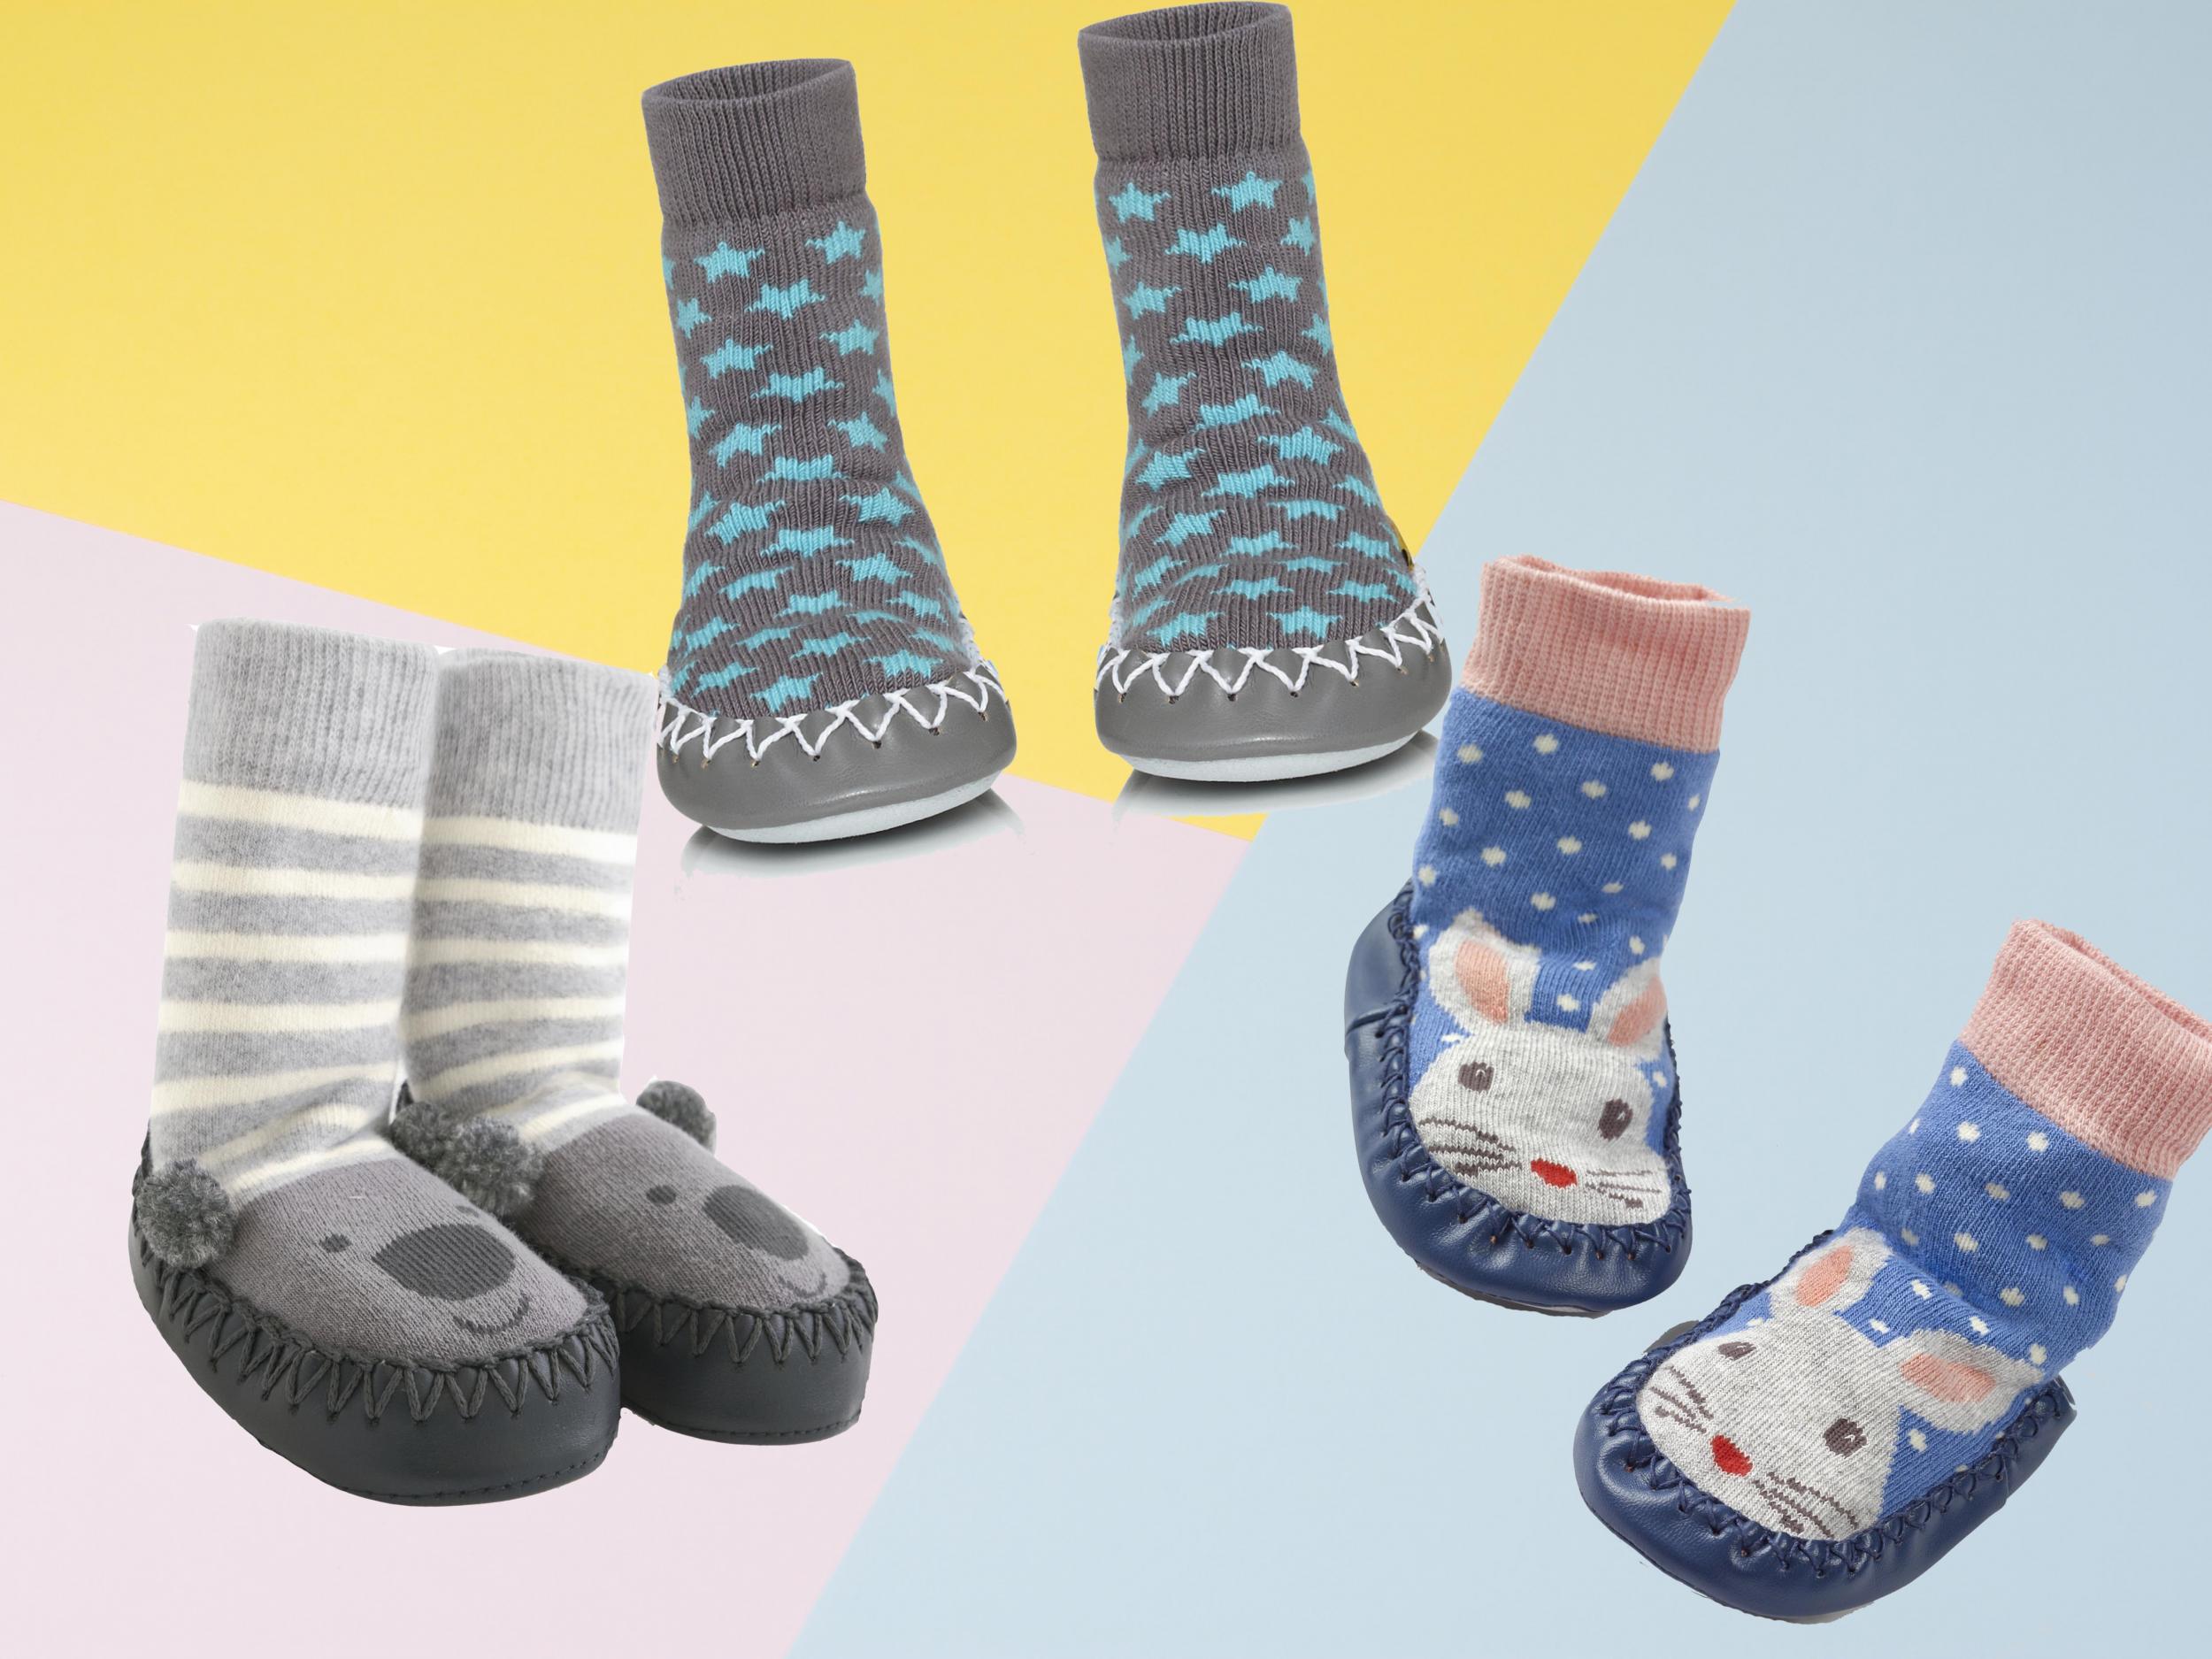 6 Pairs Toddler Infant Non Skid Socks Thick Warm Cotton Cute Animal Socks with Grips Estwell Baby Boys Girls Anti Slip Socks 